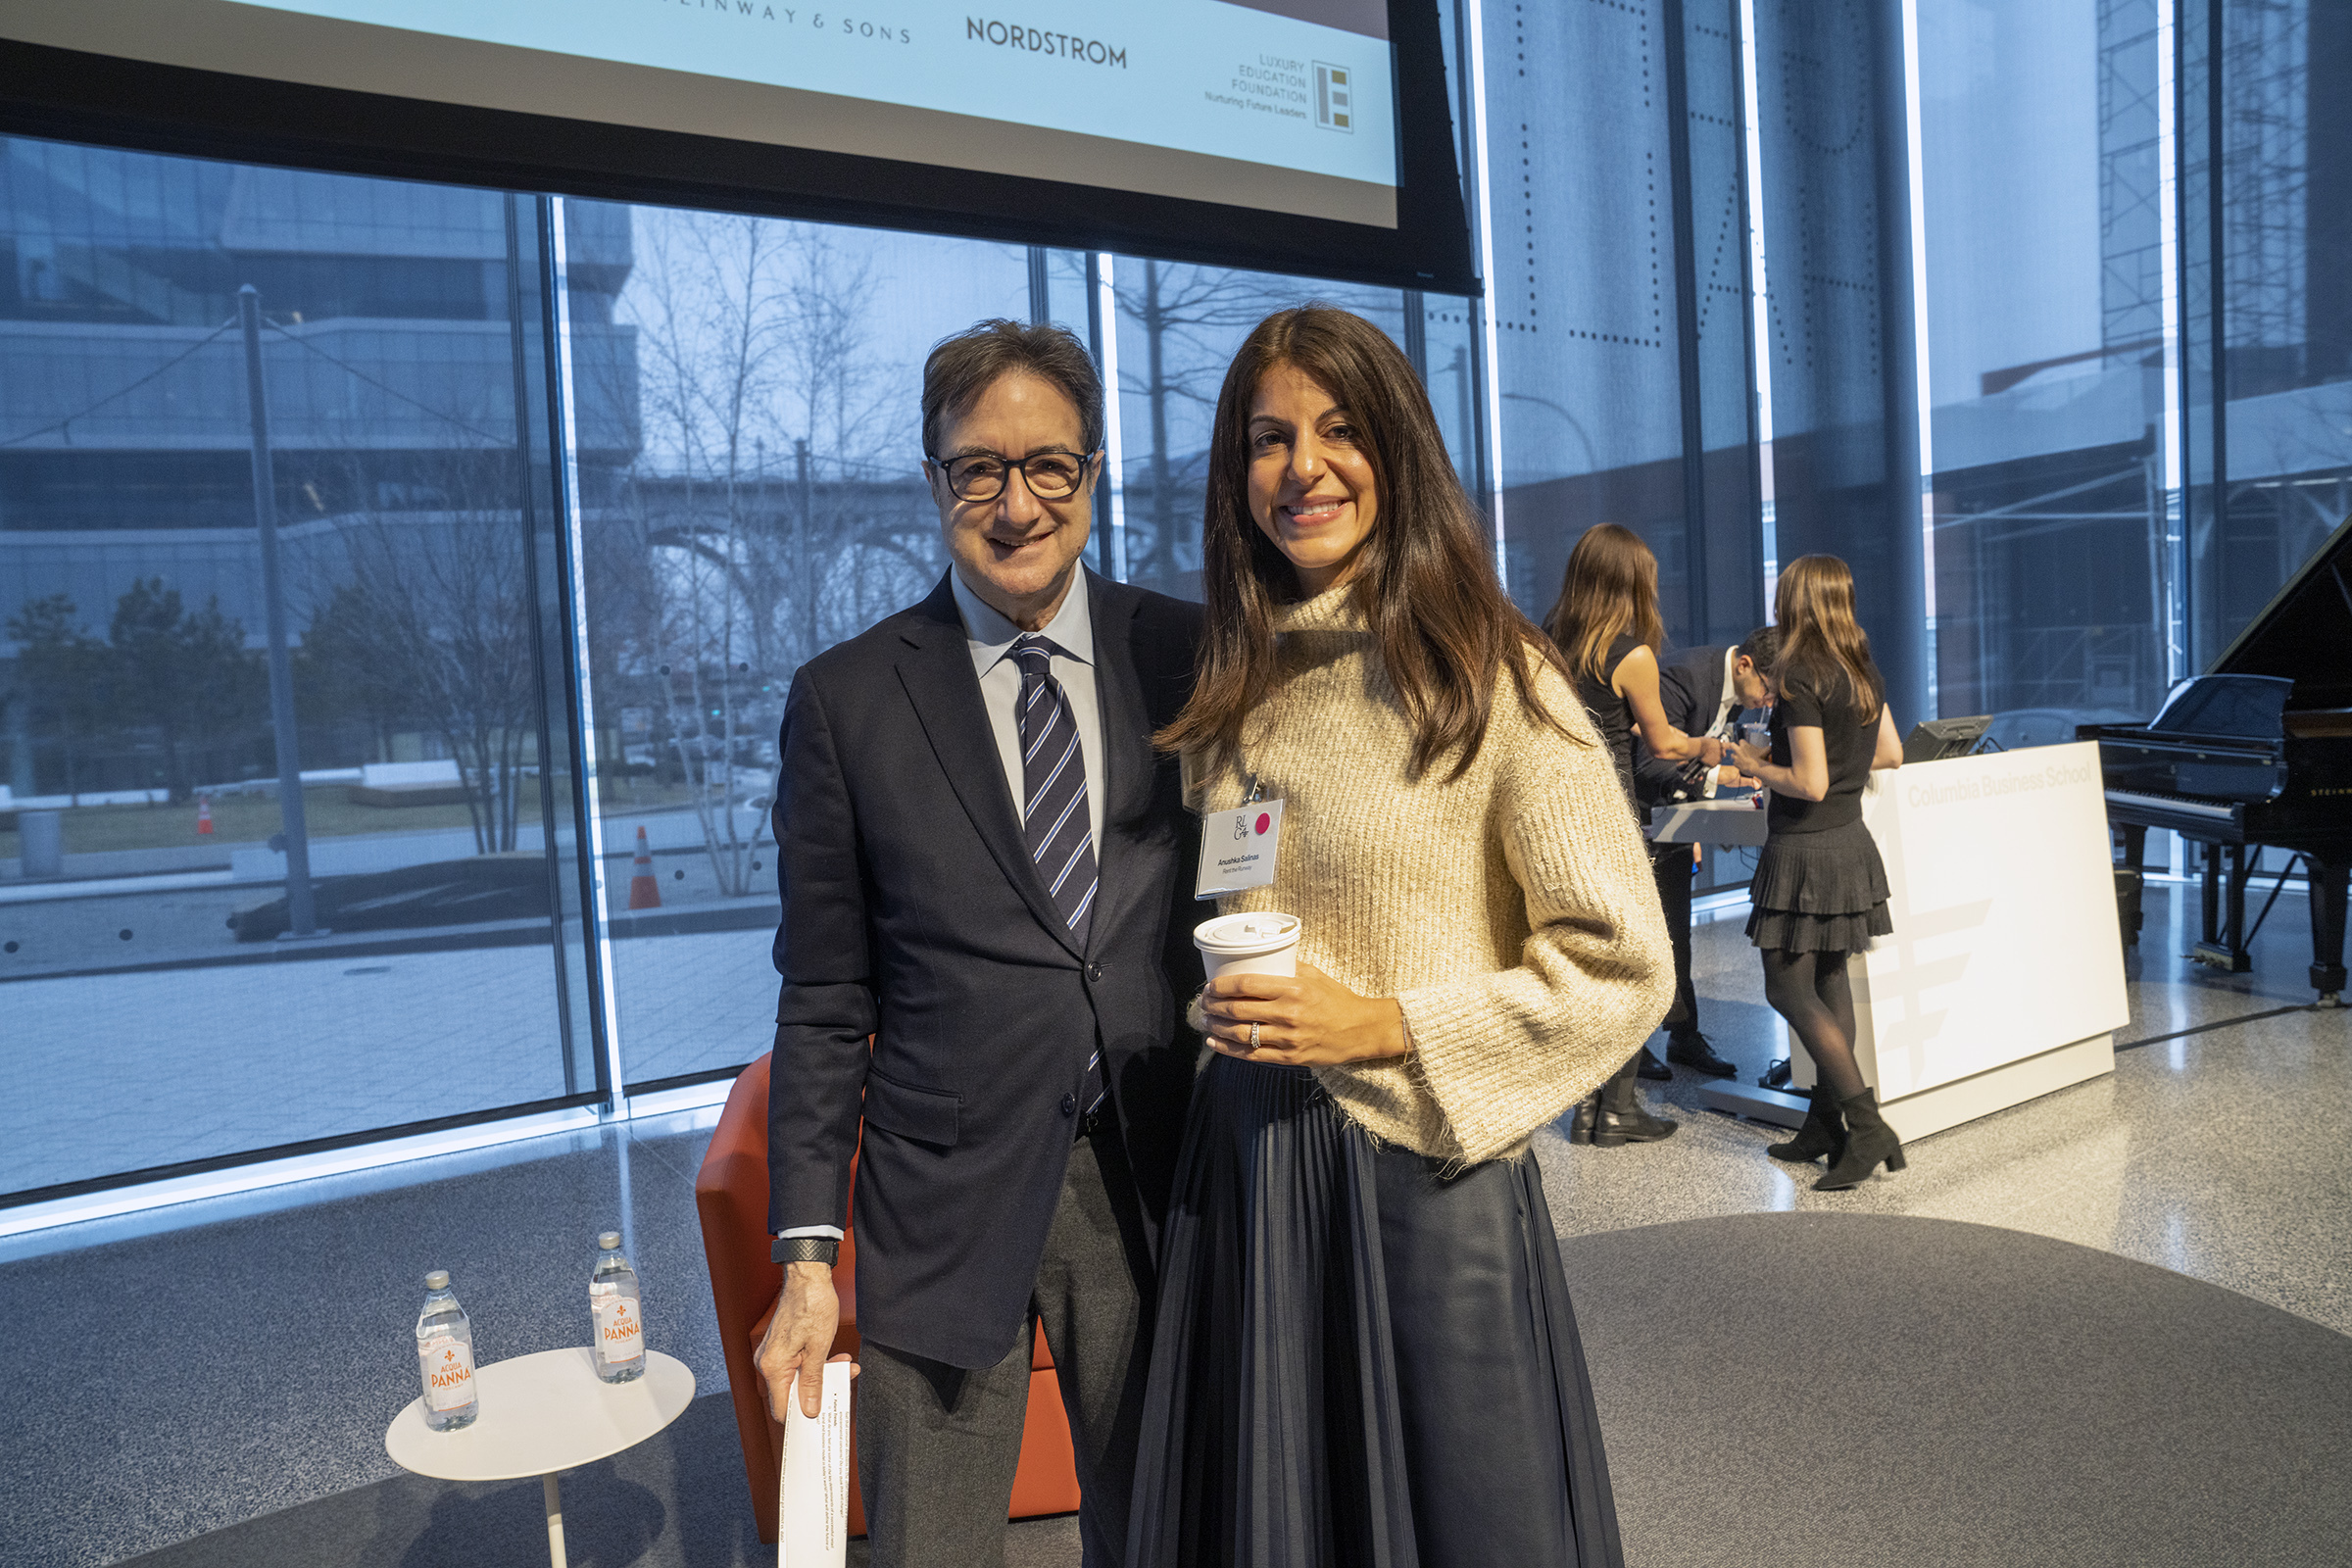 Professor Mark A. Cohen, left, with Anushka Salinas '10, president and COO of Rent the Runway